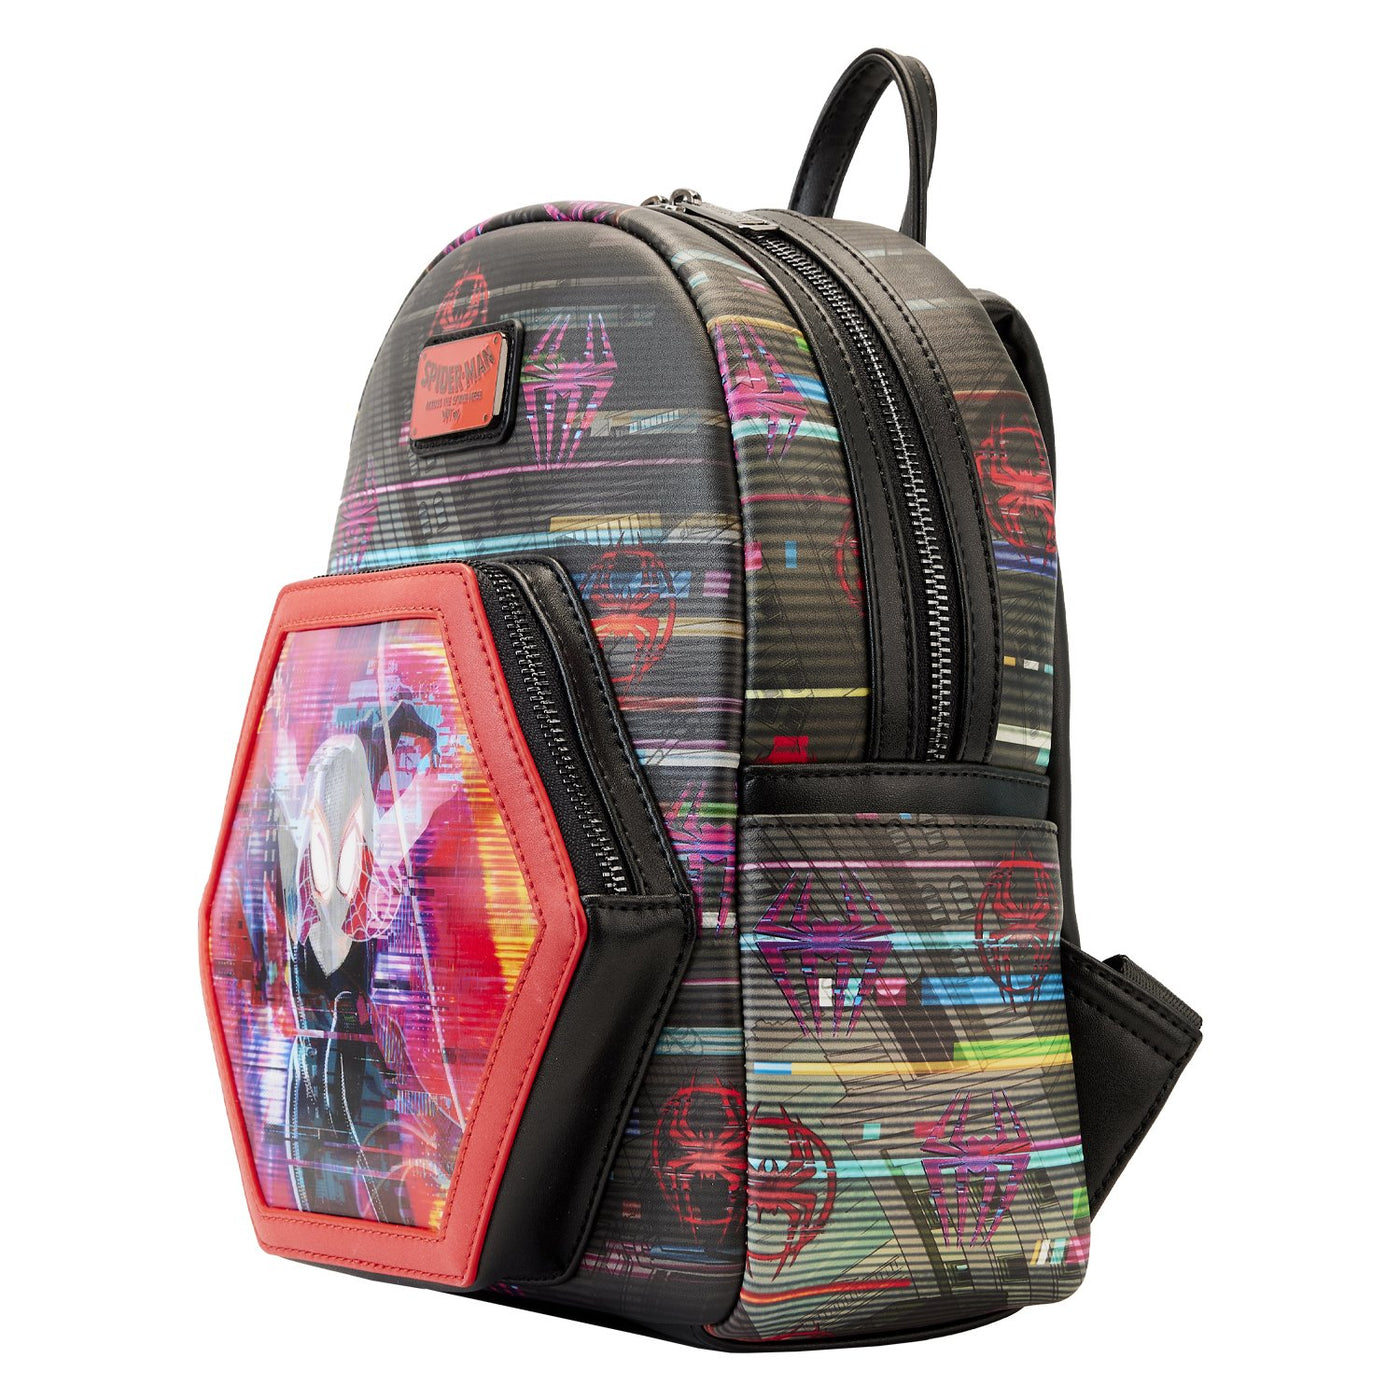 671803441880 - Loungefly Marvel Across the Spiderverse Lenticular Mini Backpack - Side View